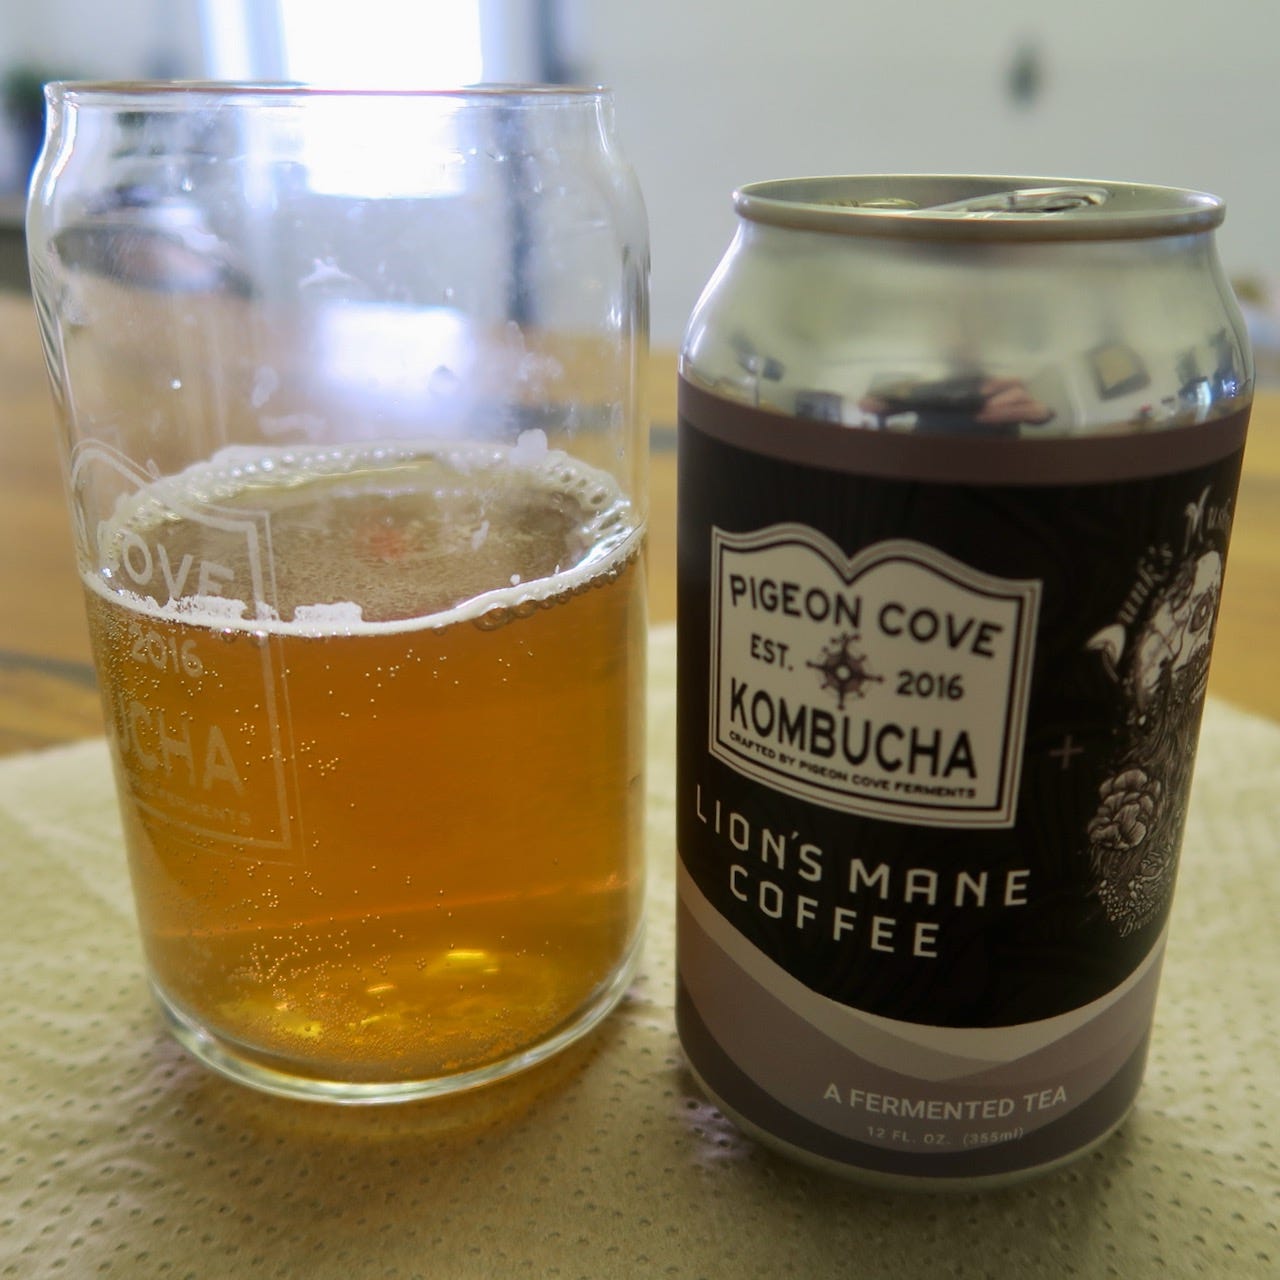 A can of kombucha and a glass of beer

Description automatically generated